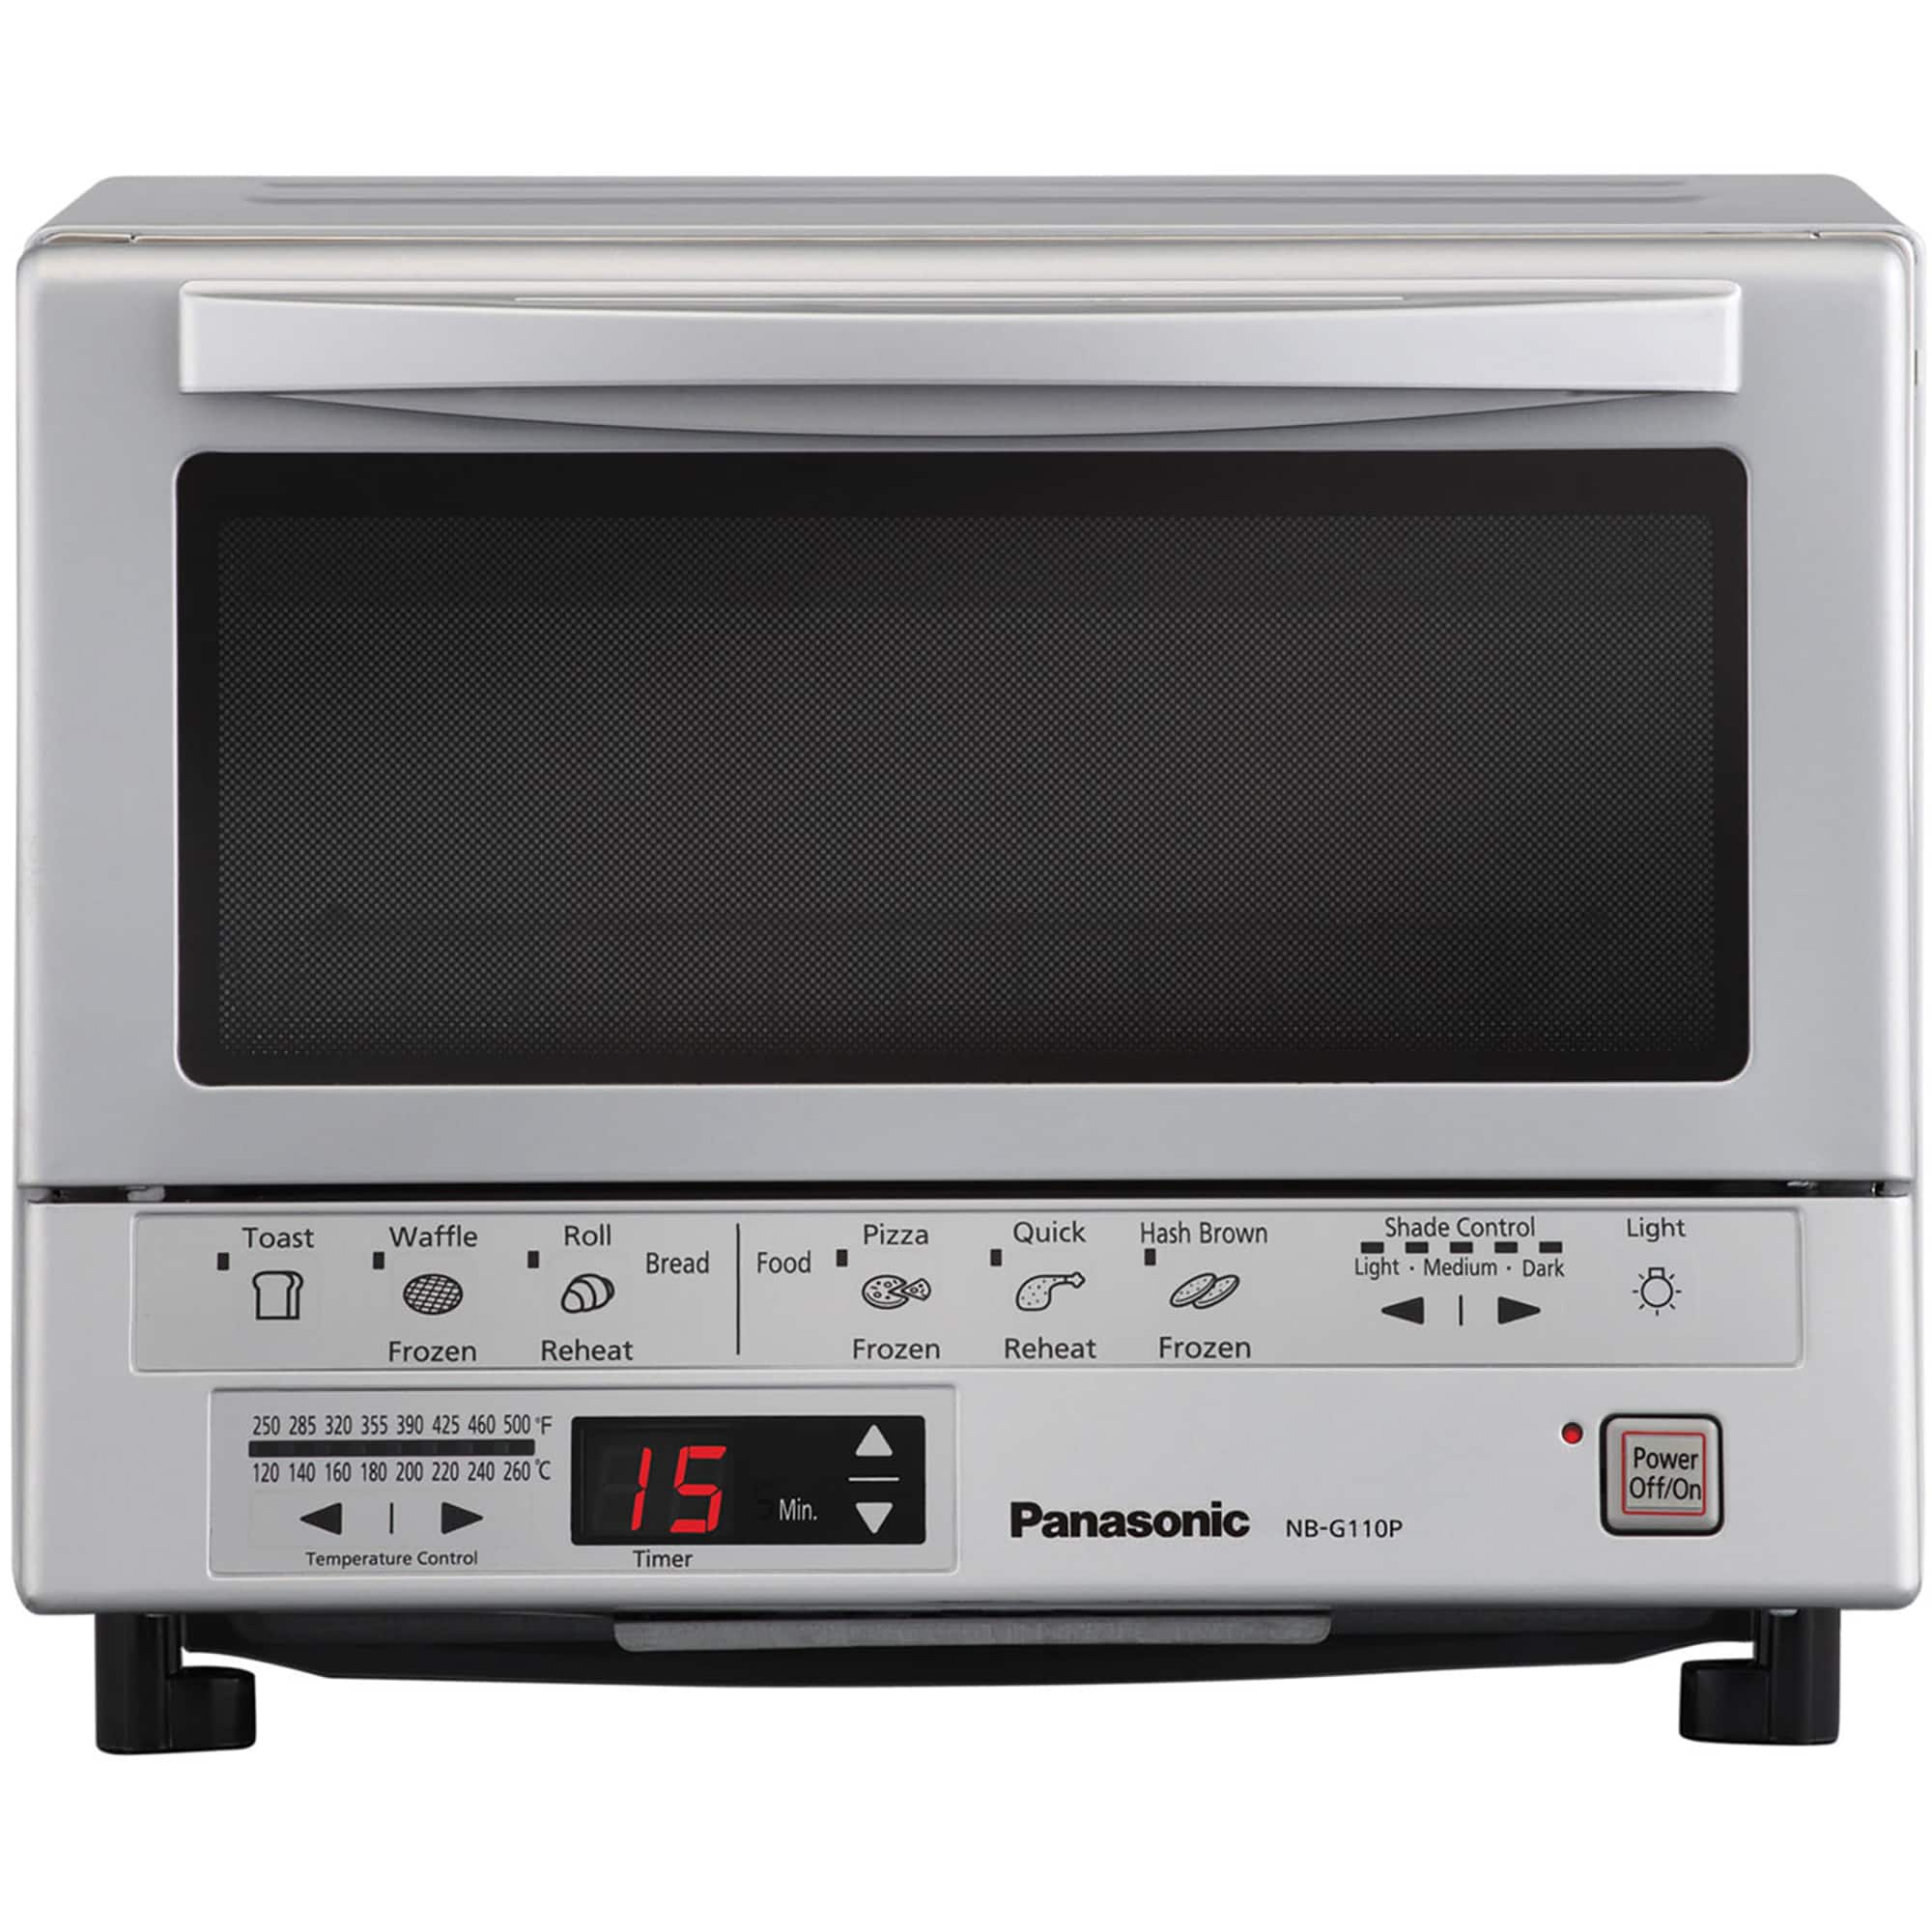 Panasonic FlashXpress Stainless Steel Toaster Oven NB-G110P